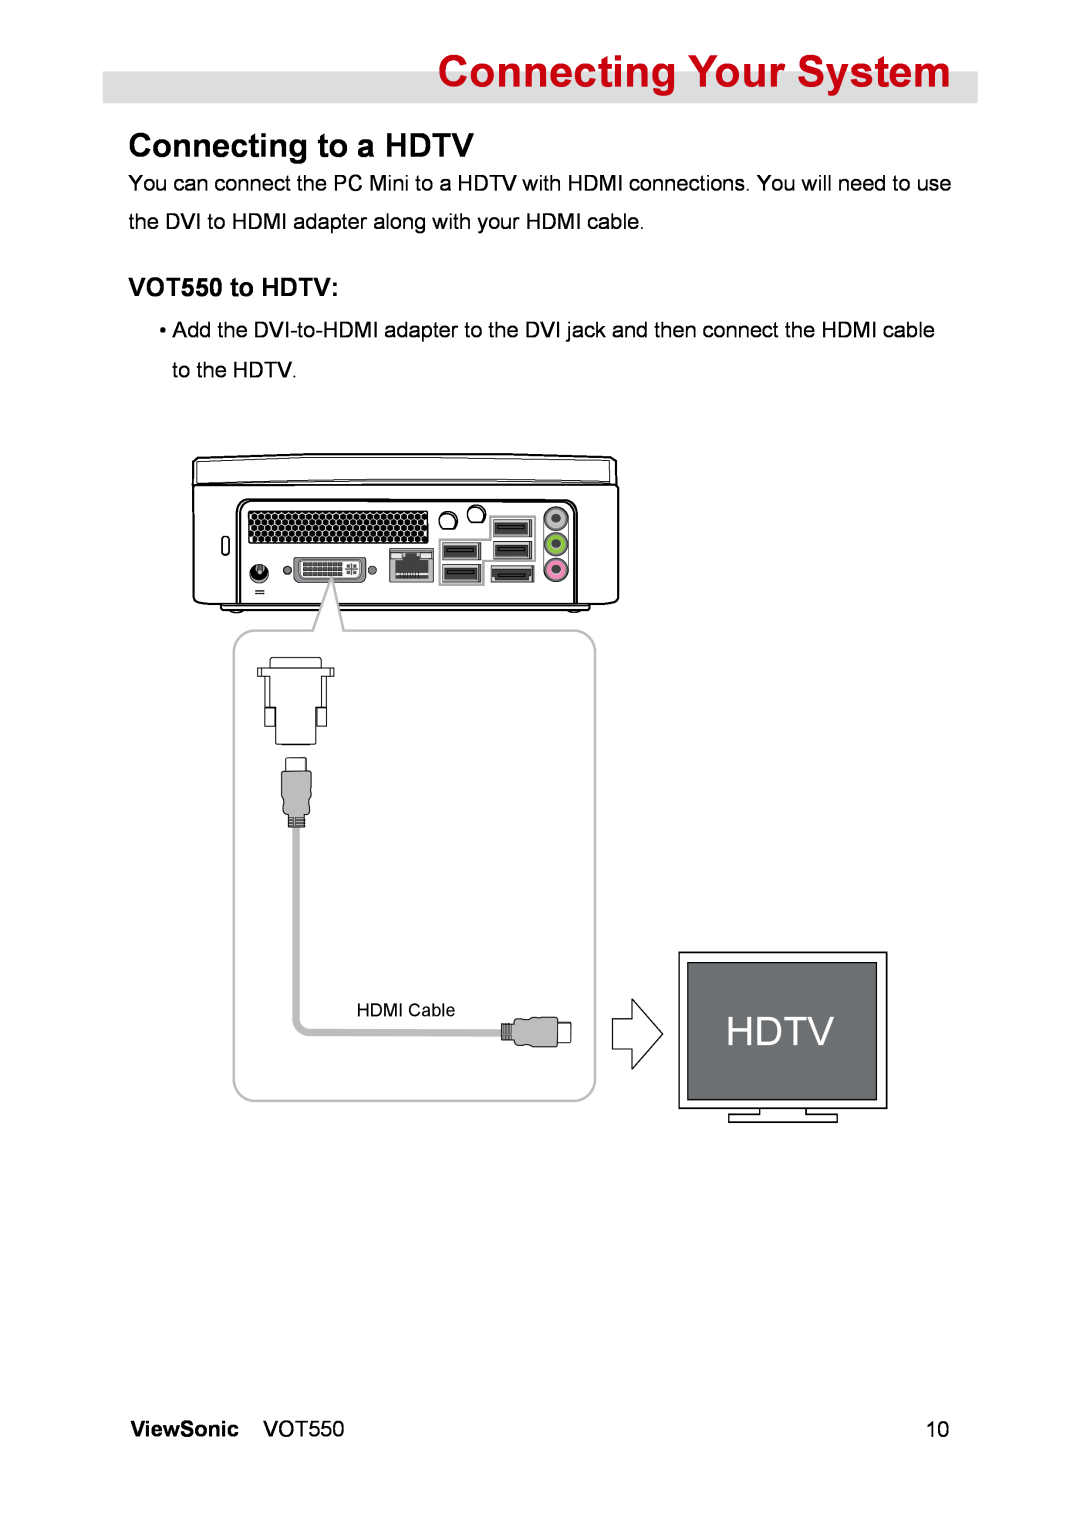 ViewSonic manual Connecting to a HDTV, VOT550 to HDTV, Connecting Your System, Hdtv, ViewSonic VOT550 